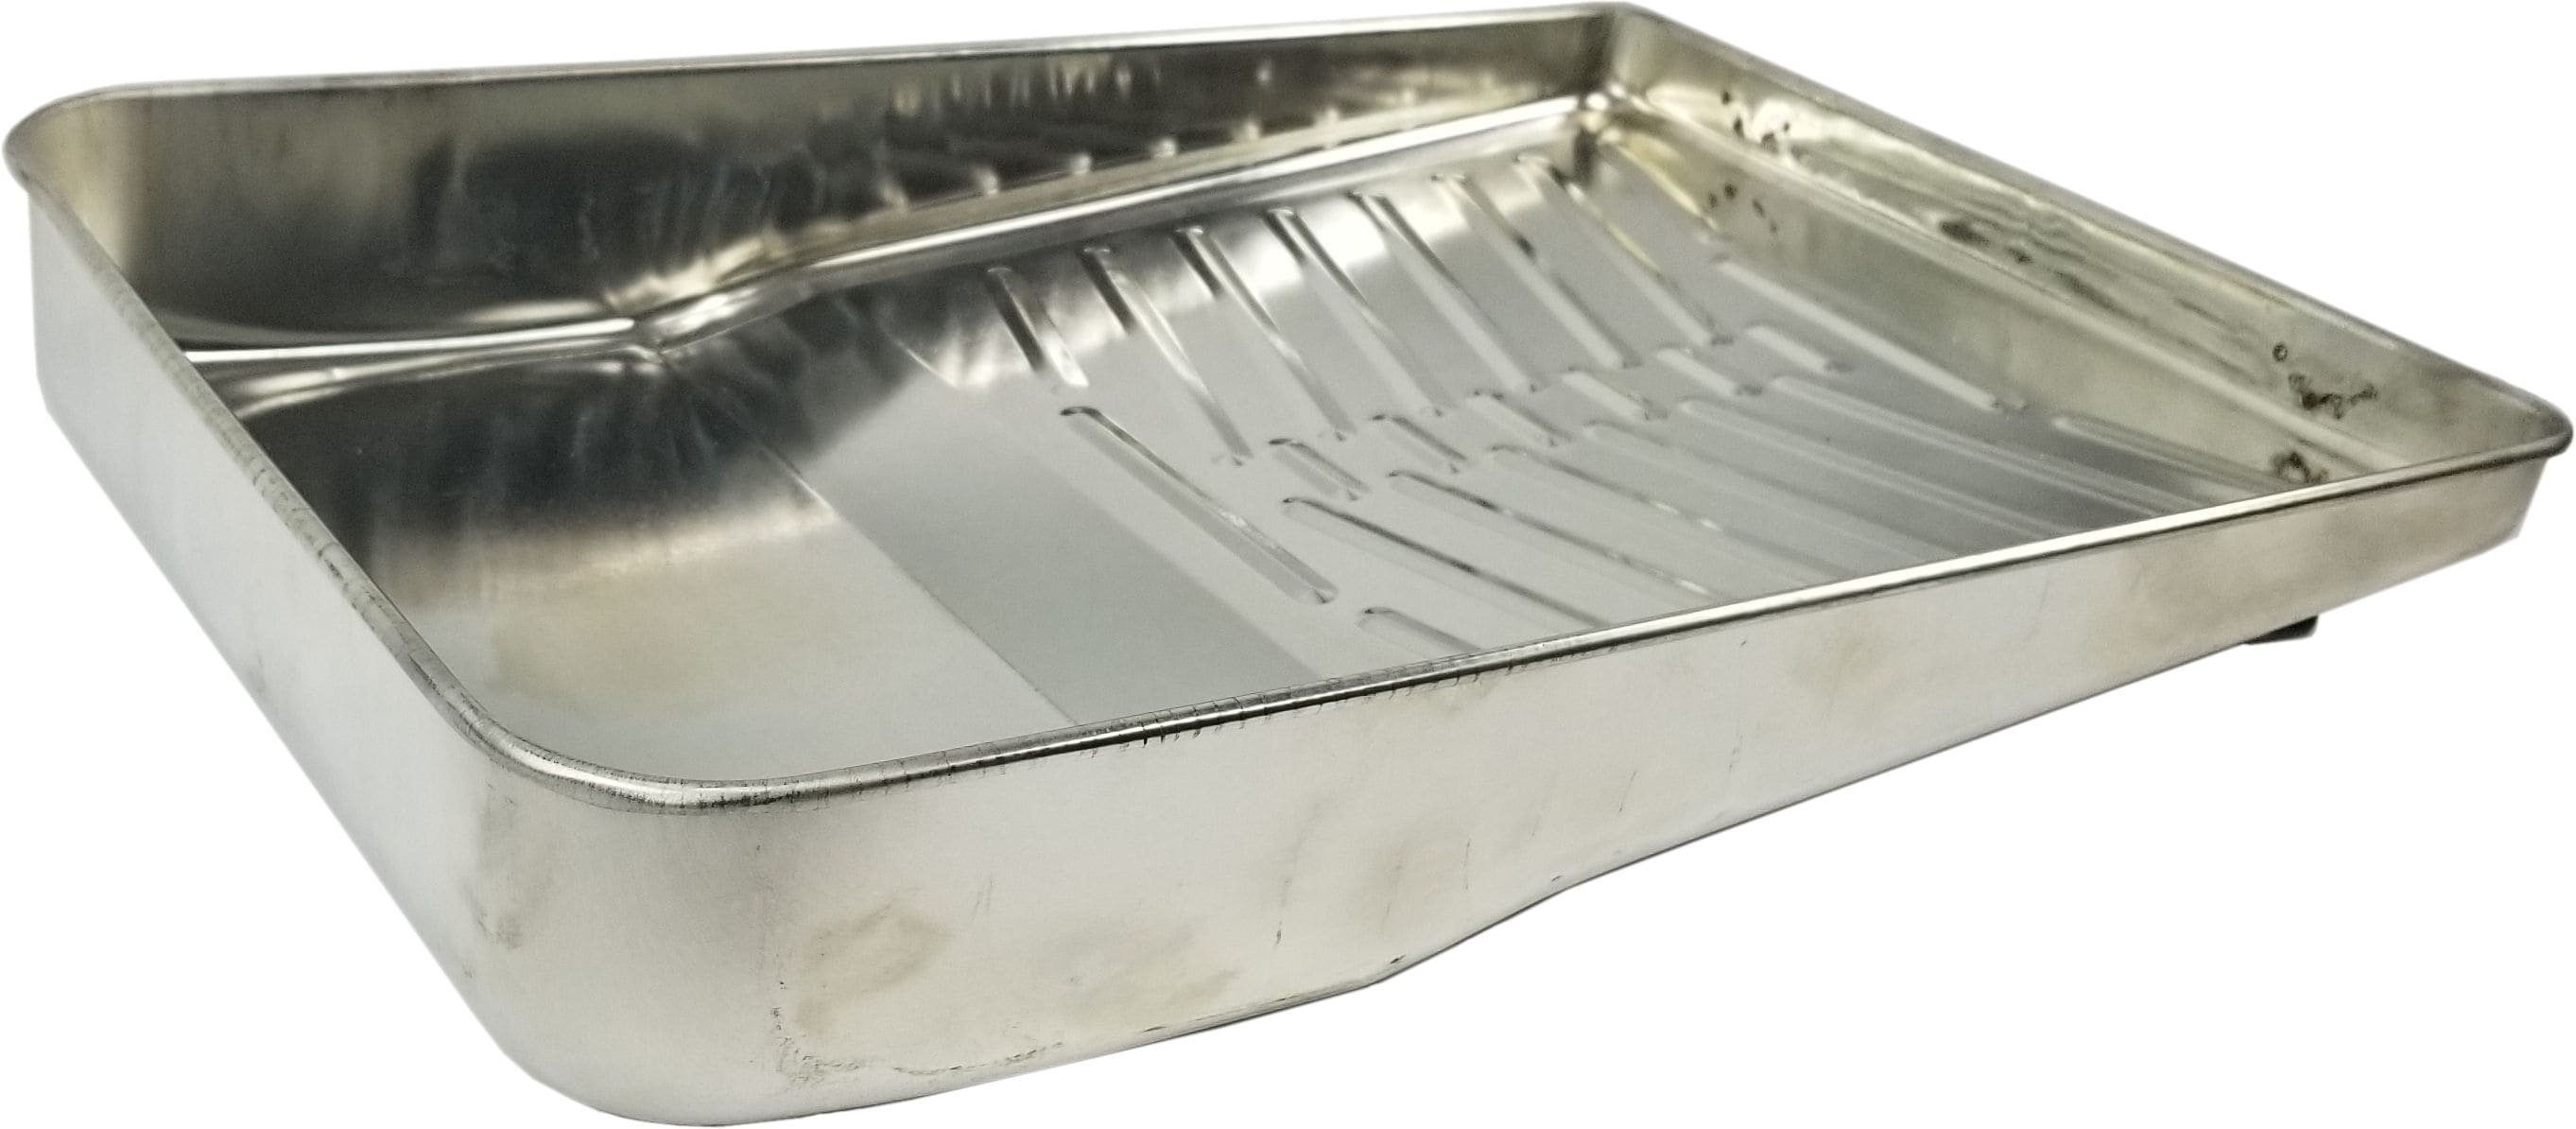 7.5 Foil Trays Dishes Catering Containers Tray Bake Cake Tins